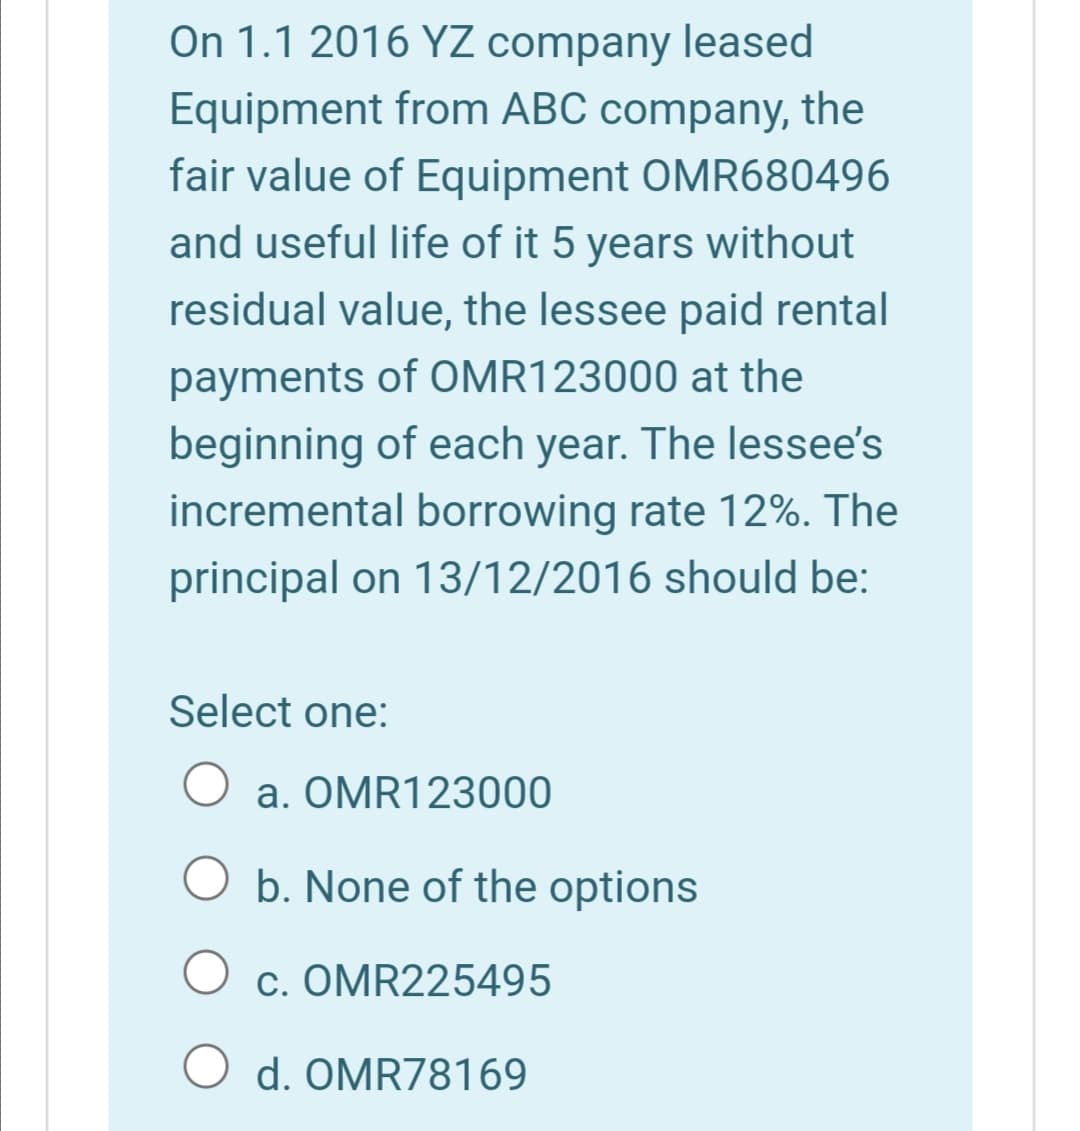 On 1.1 2016 YZ company leased
Equipment from ABC company, the
fair value of Equipment OMR680496
and useful life of it 5 years without
residual value, the lessee paid rental
payments of OMR123000 at the
beginning of each year. The lessee's
incremental borrowing rate 12%. The
principal on 13/12/2016 should be:
Select one:
a. OMR123000
b. None of the options
c. OMR225495
O d. OMR78169
